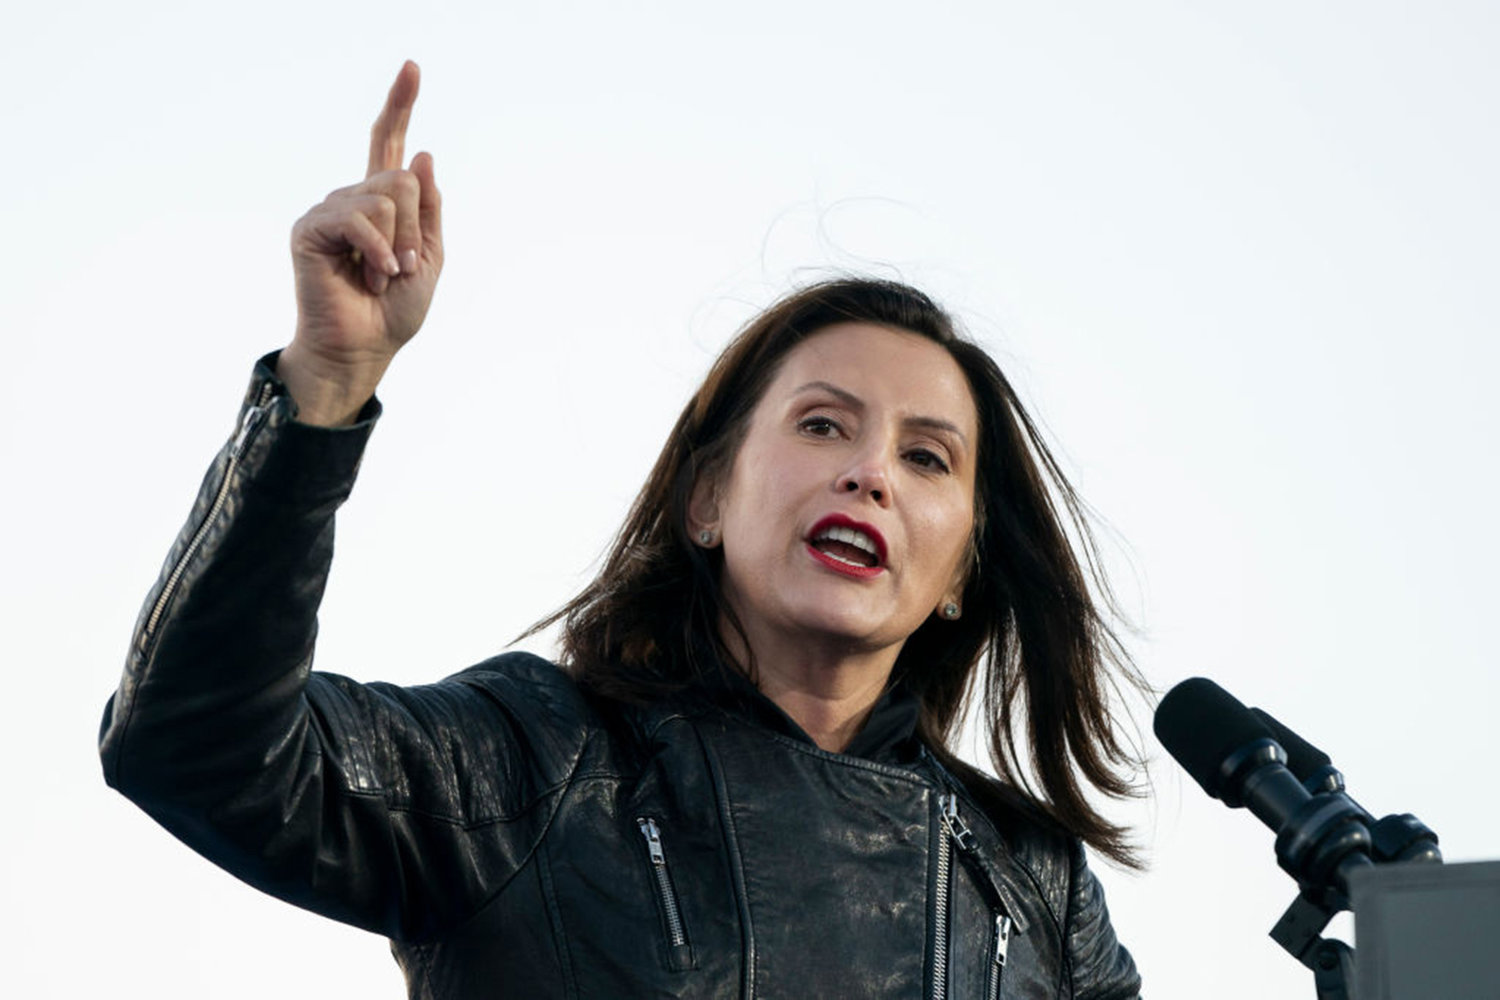 Michigan Gov. Gretchen Whitmer speaks during a drive-in campaign rally at Belle Isle on Oct. 31, 2020, in Detroit. (Drew Angerer/Getty Images/TNS)